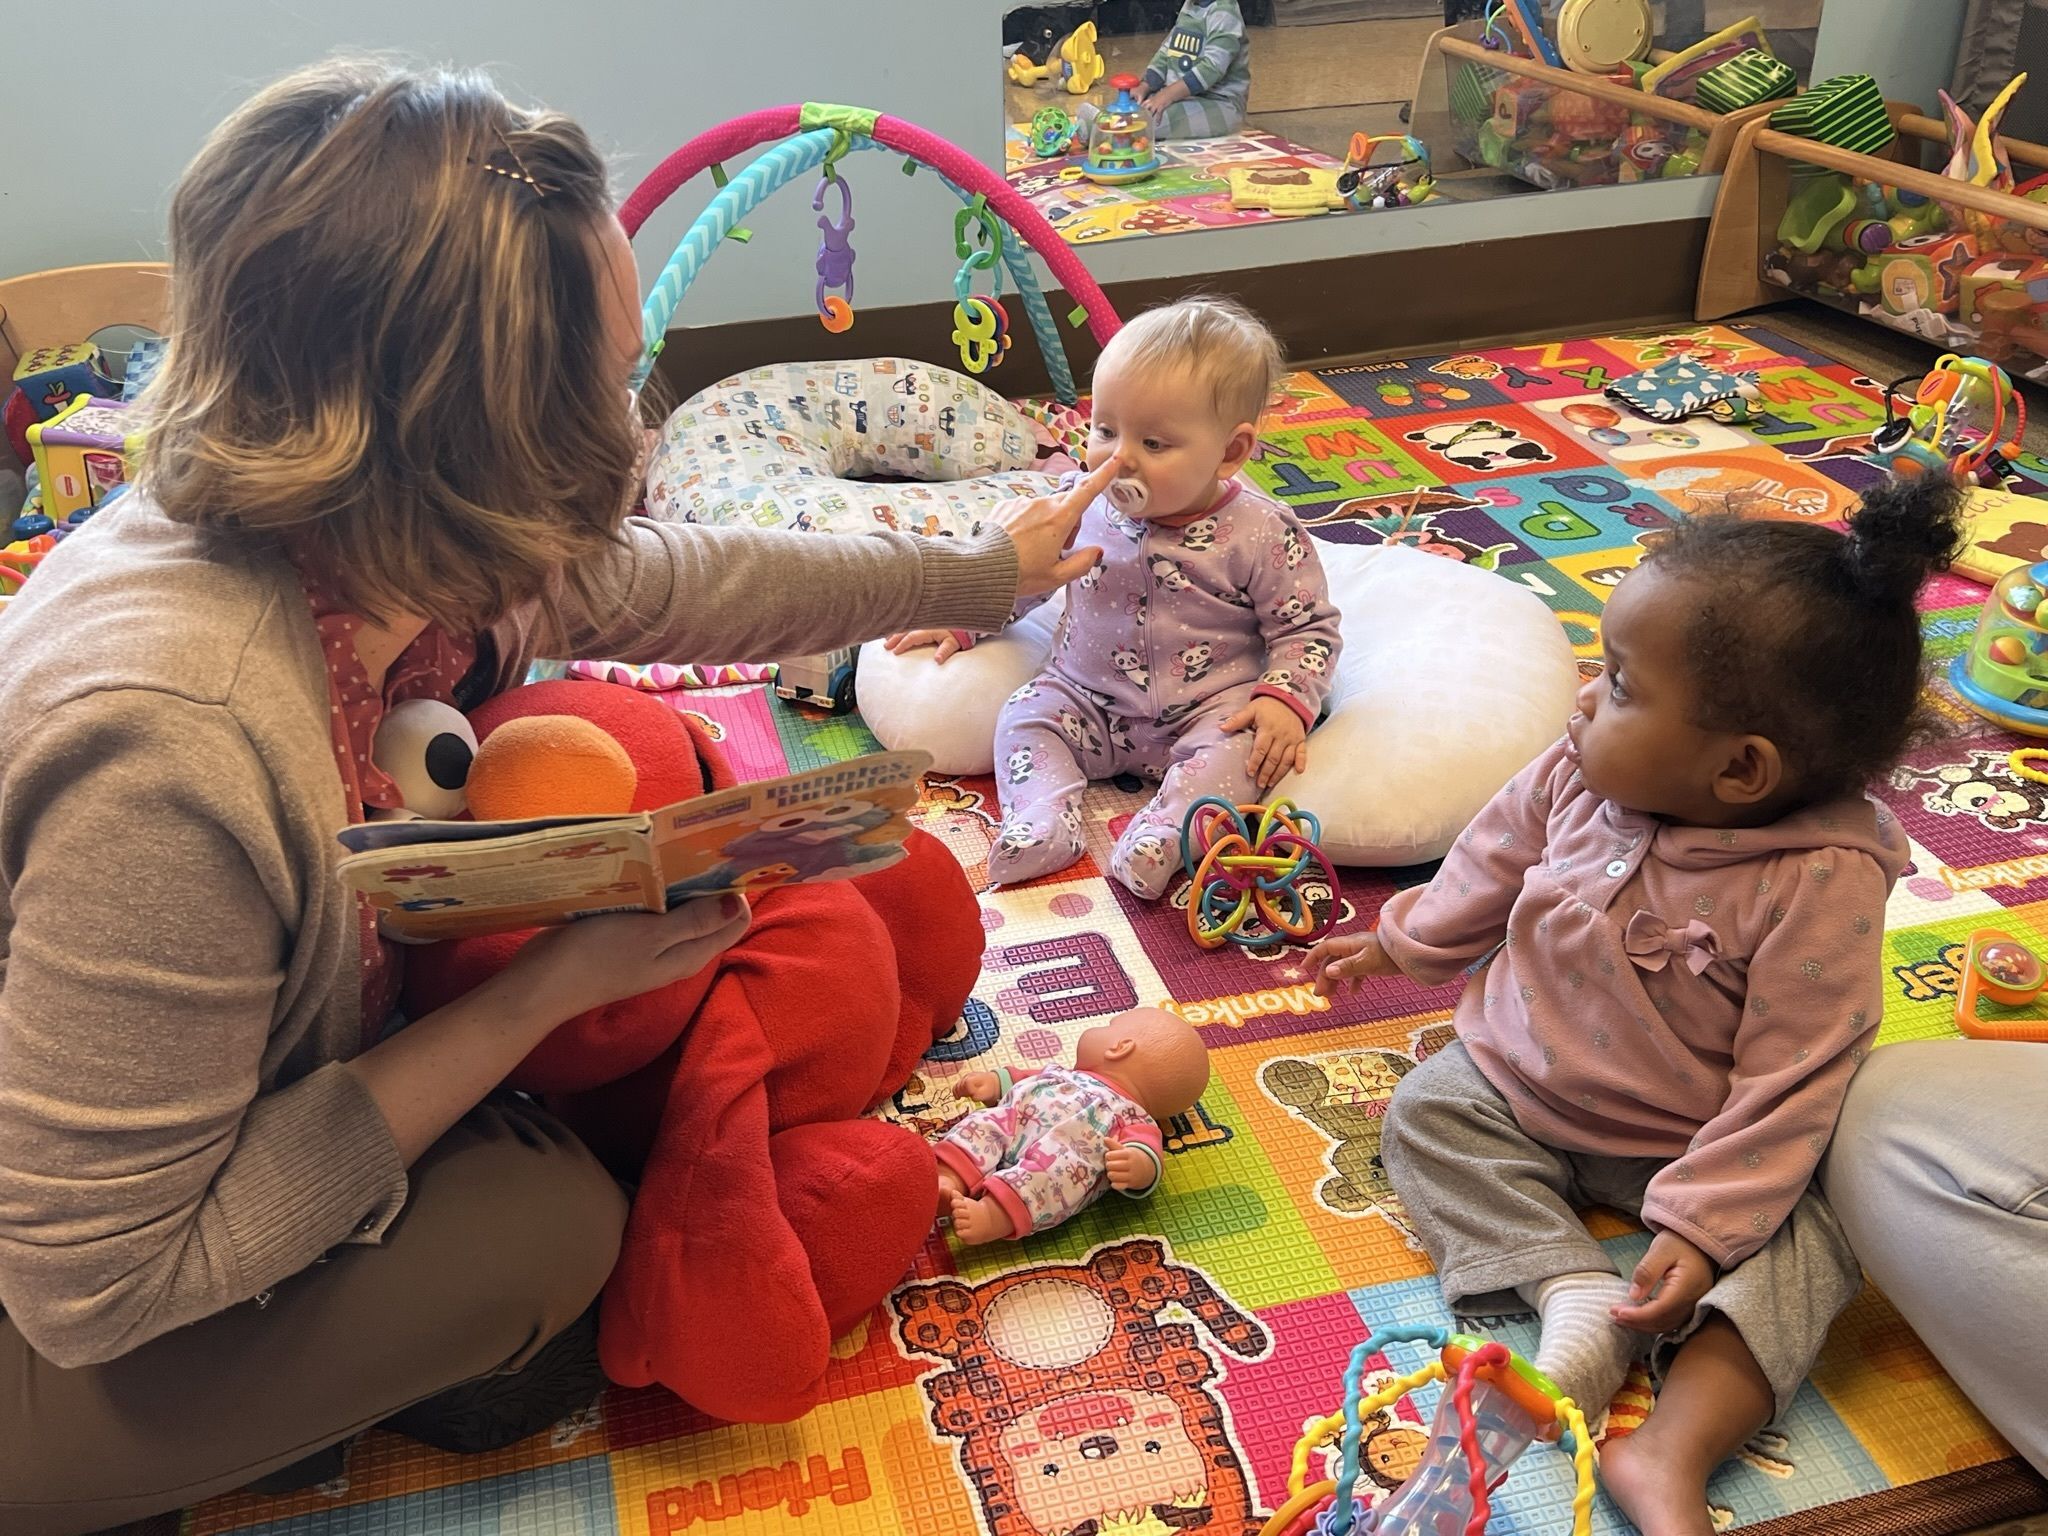 A lady sits on the floor of a classroom with two infants. There are toys surrounding the kids as the lady reads them a book while tapping the nose of one of the infants.